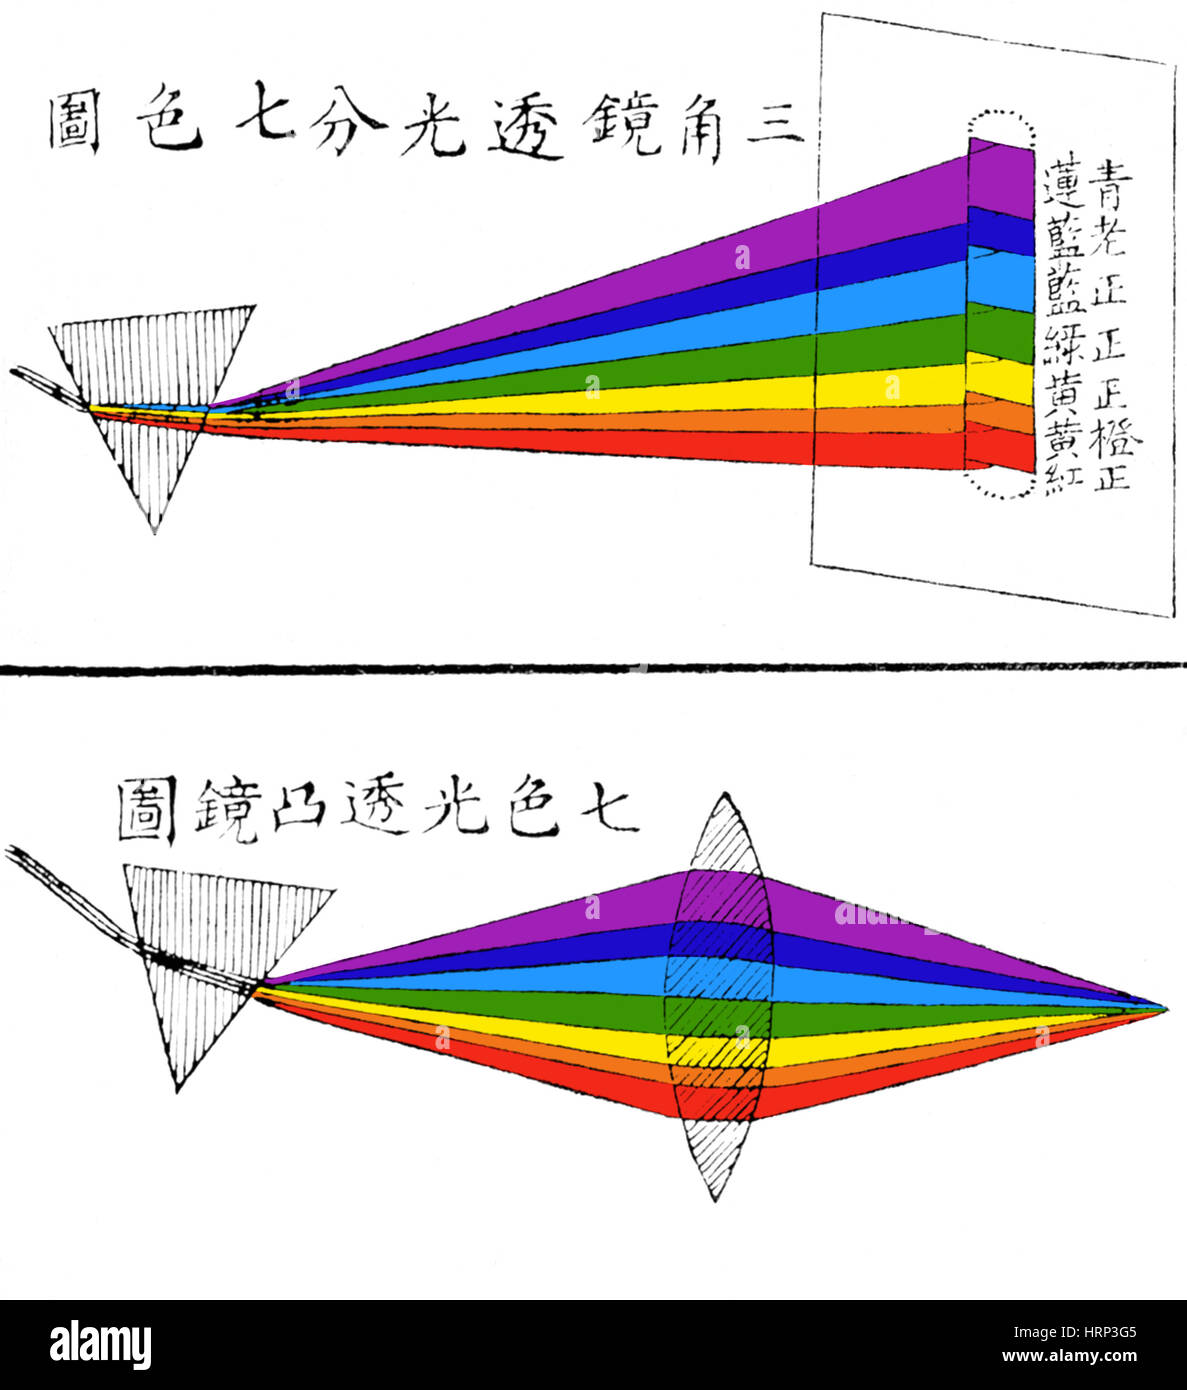 Chinese Illustration Showing Two Prisms, 1854 Stock Photo